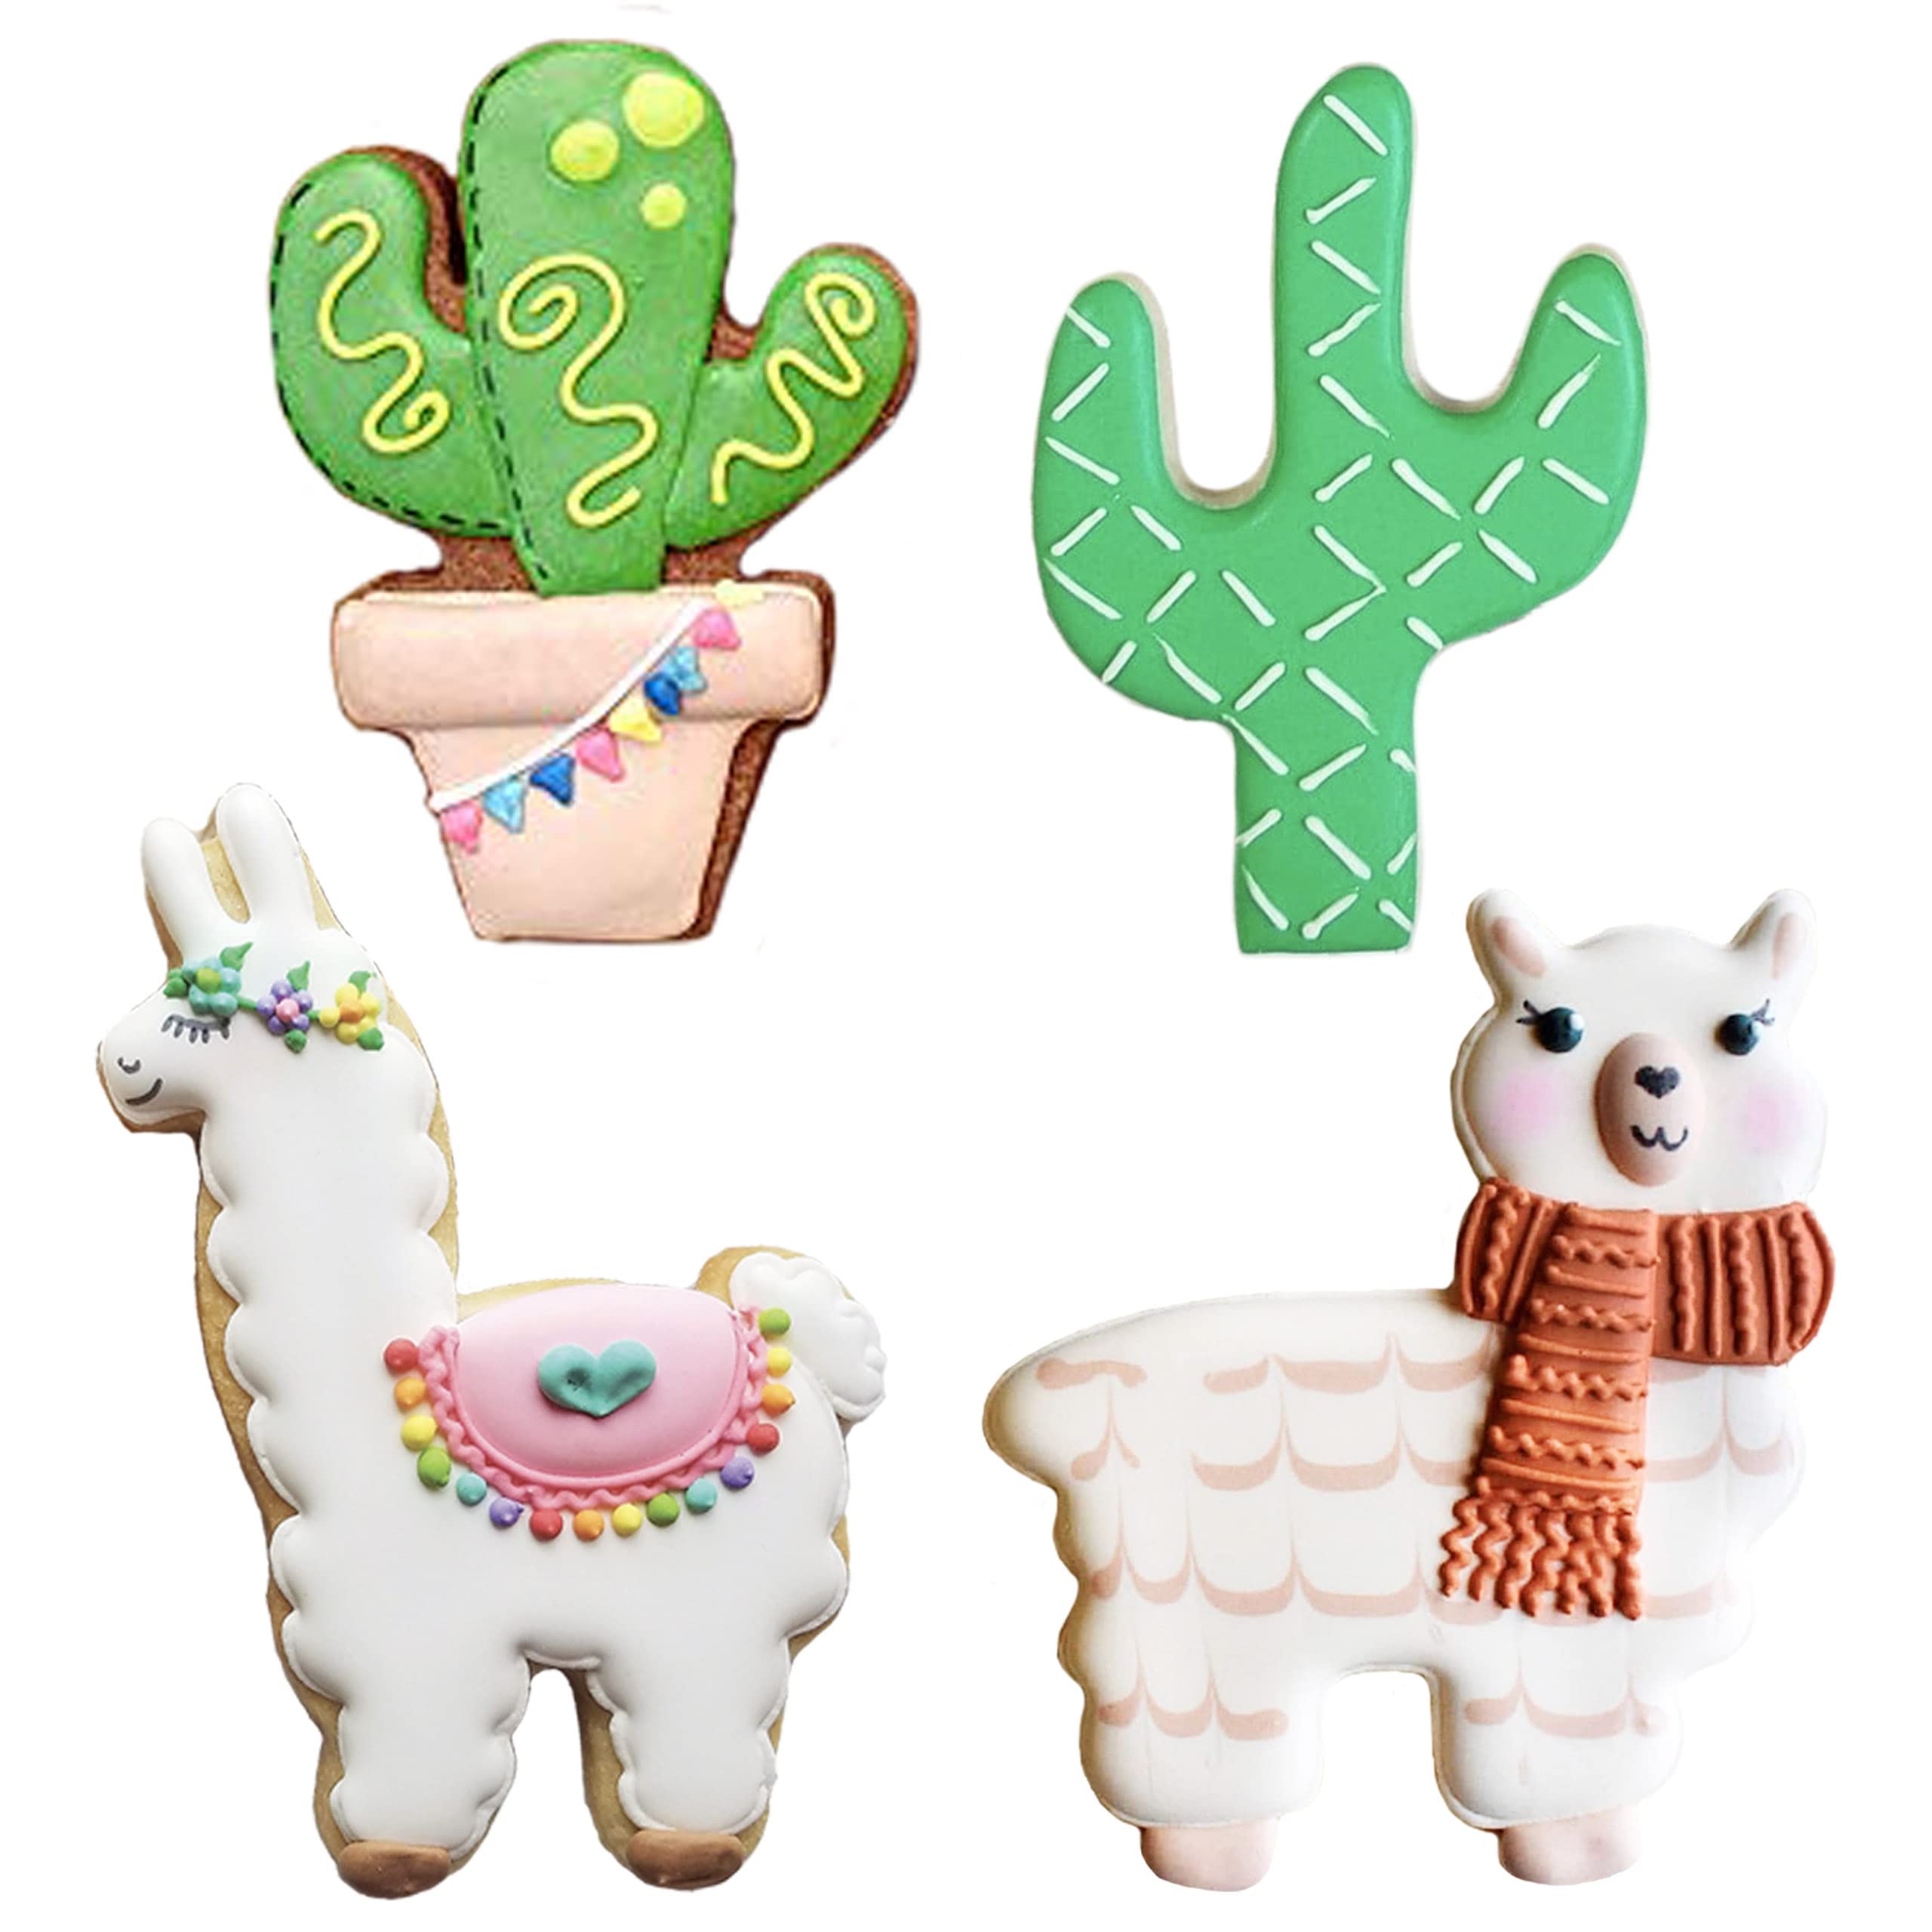 Llama and Cactus Cookie Cutters 4-Pc Set Made in USA by Ann Clark